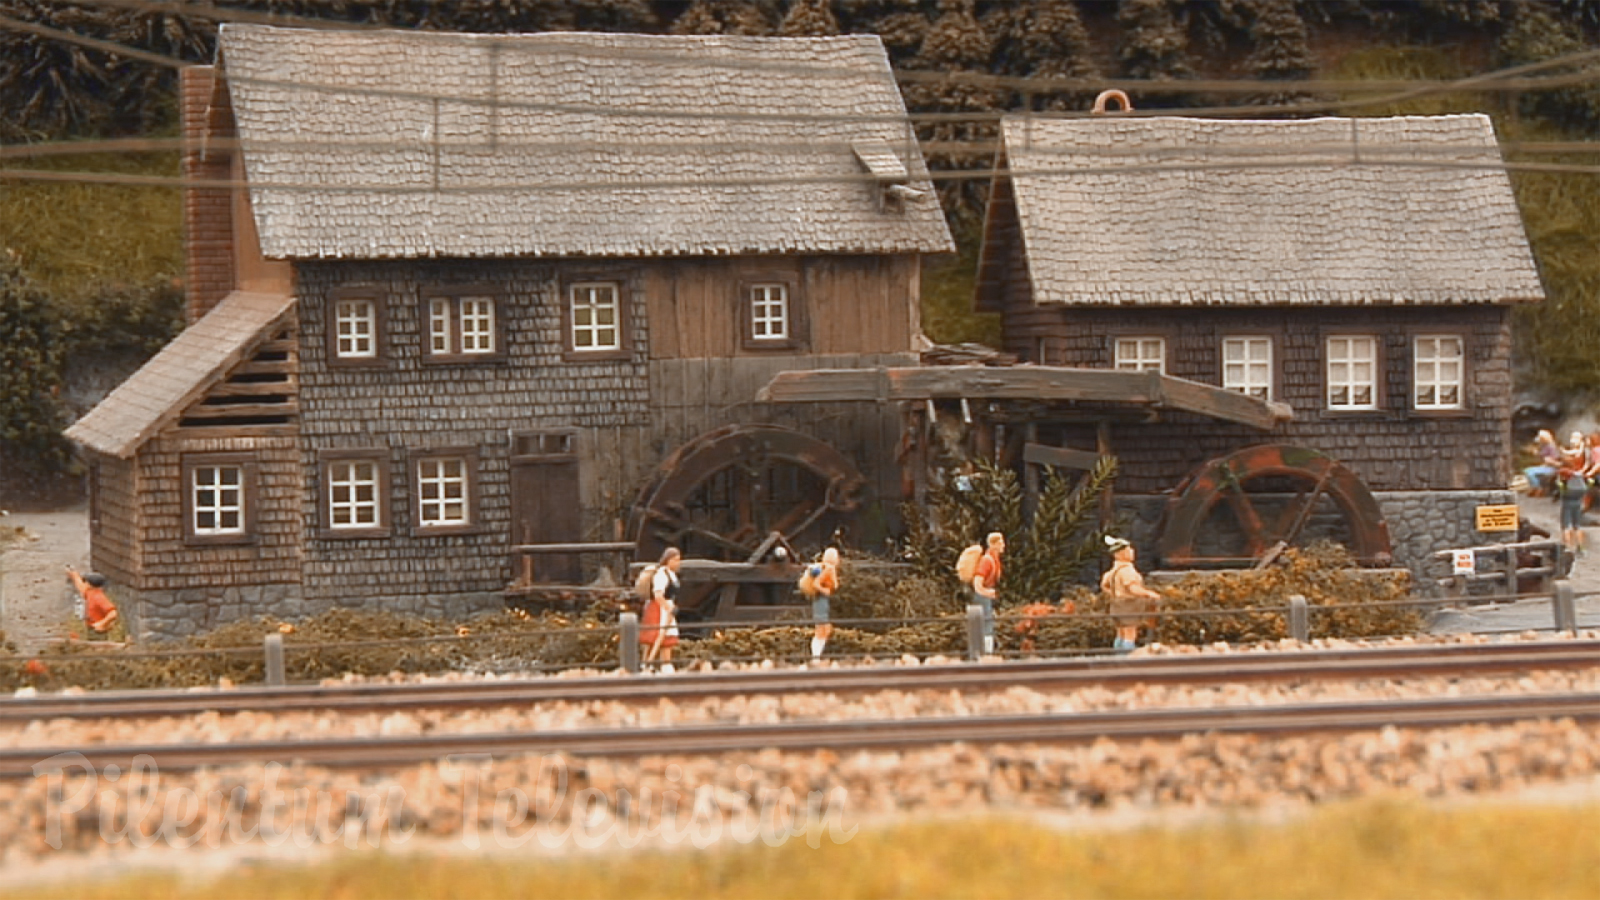 Model trains in action on HO scale layout modules